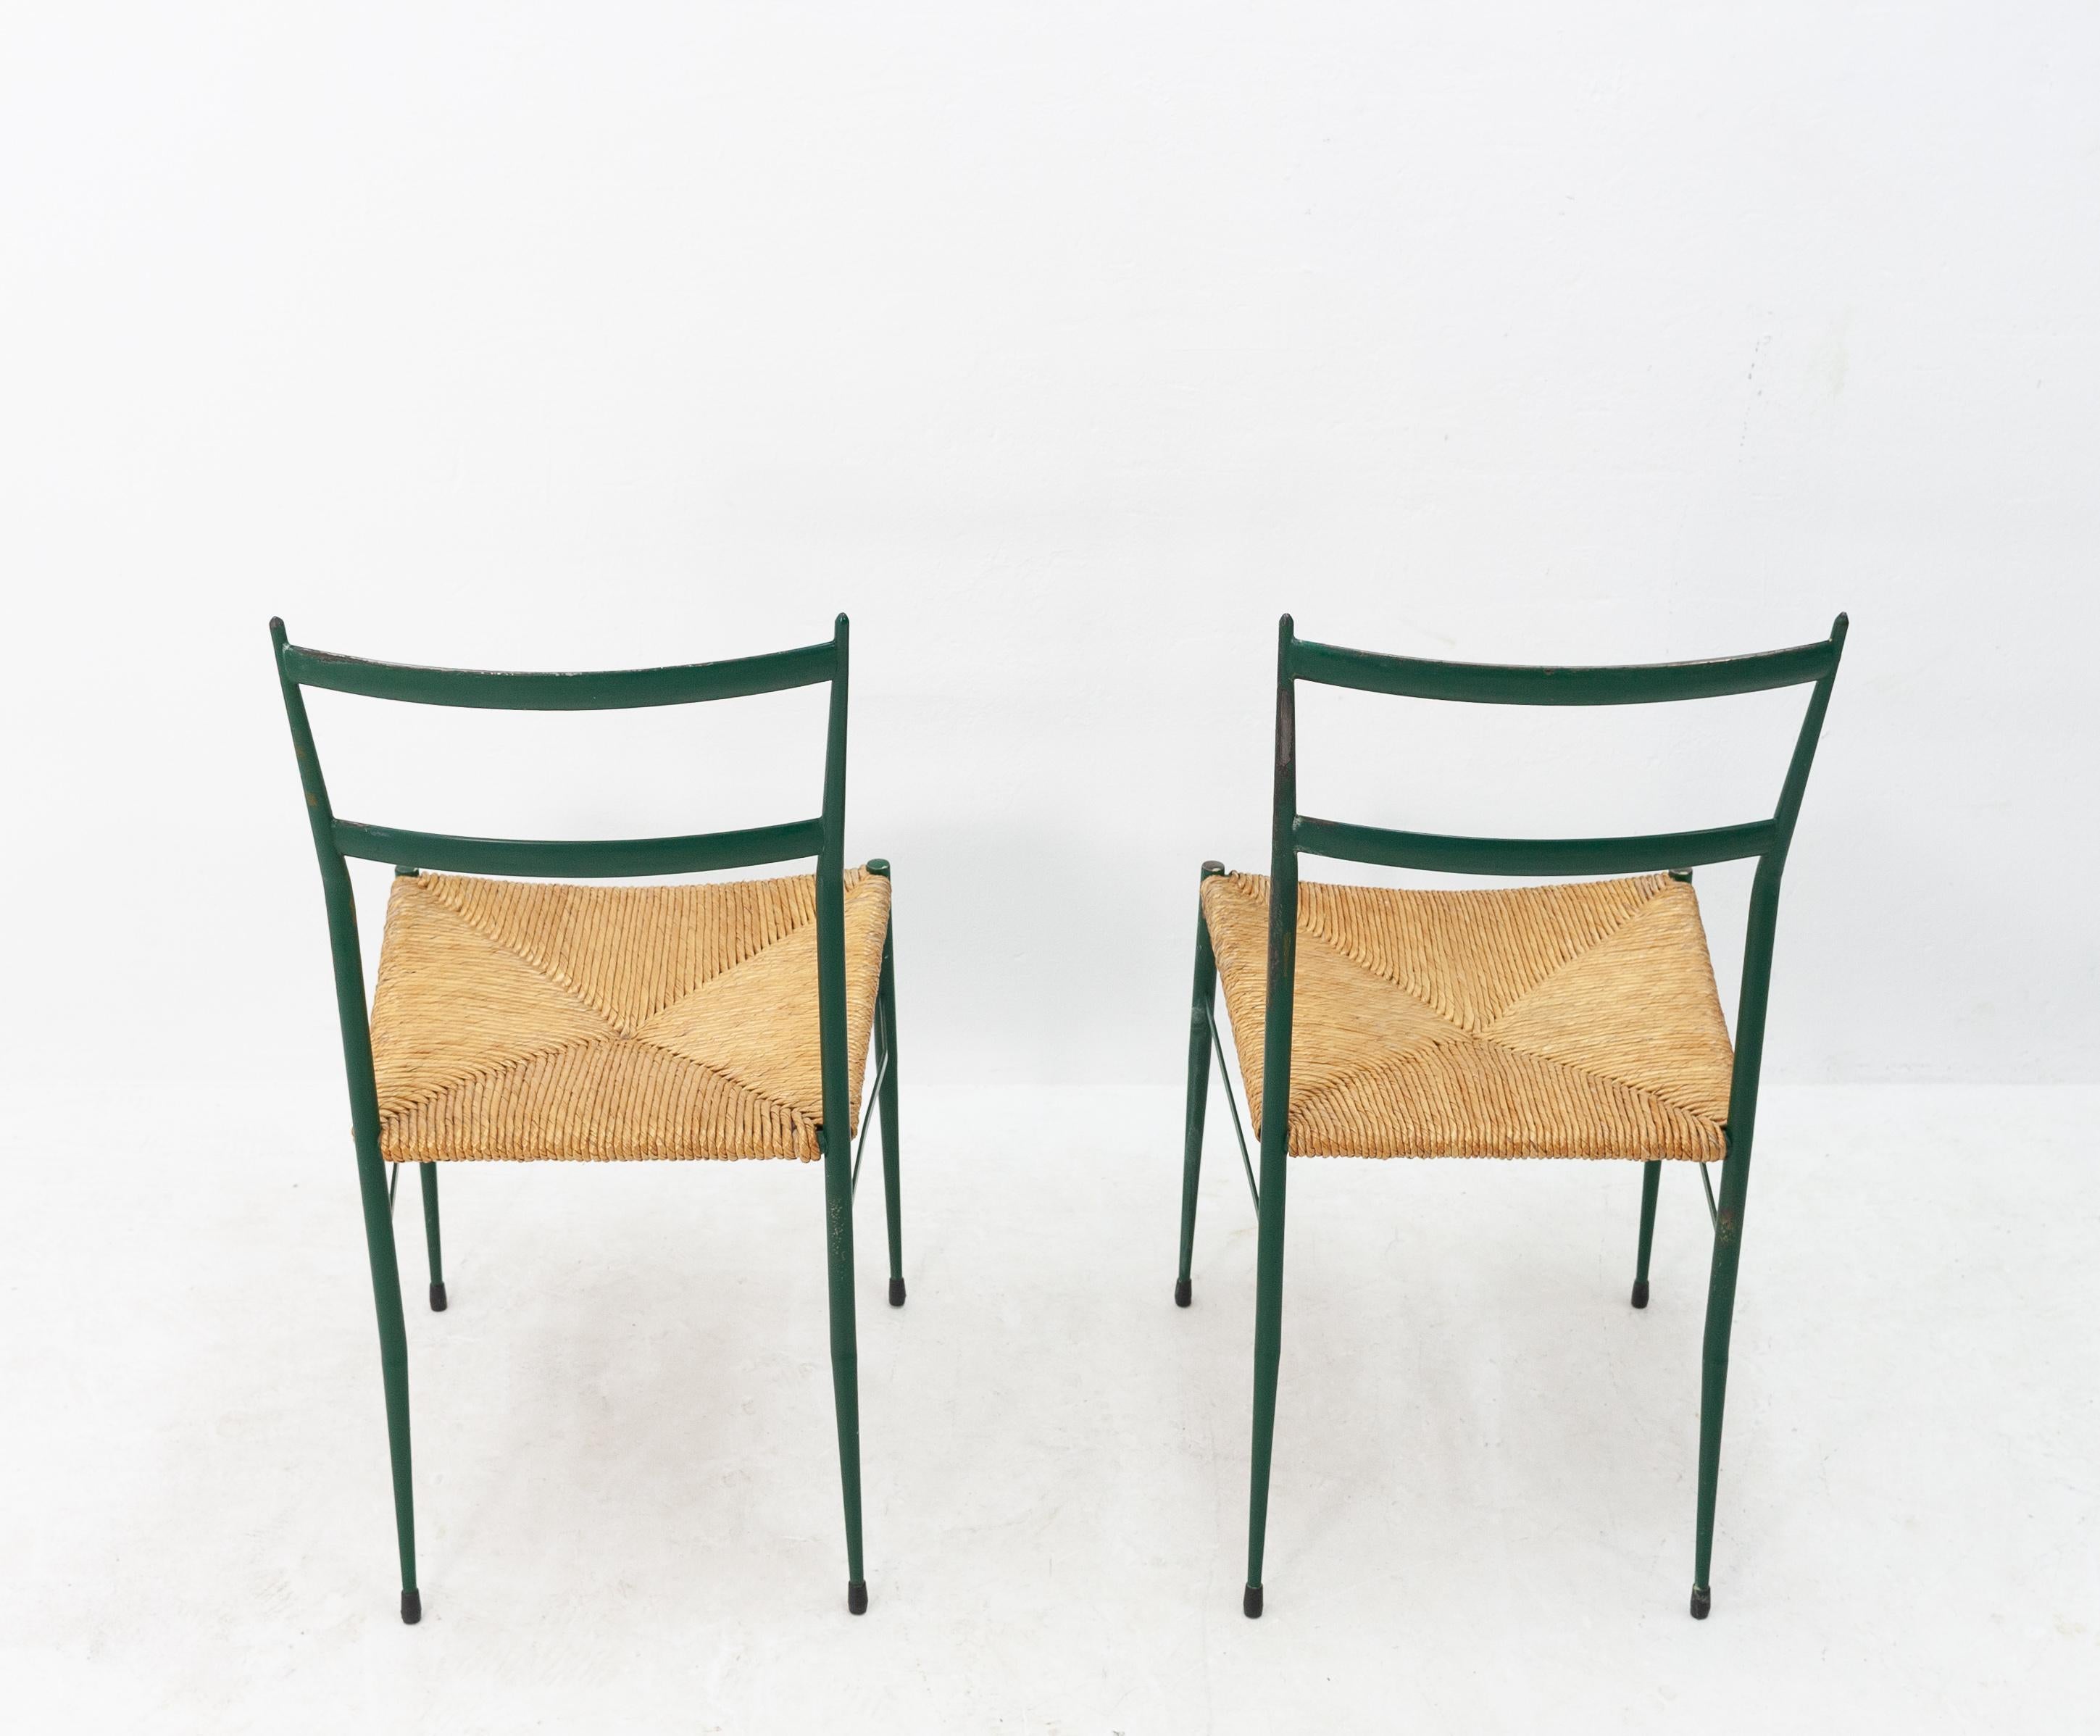 Two metal 'superleggera' style chairs attributed to Gio Ponti. These chairs where sold in the famous Dutch warehouse 